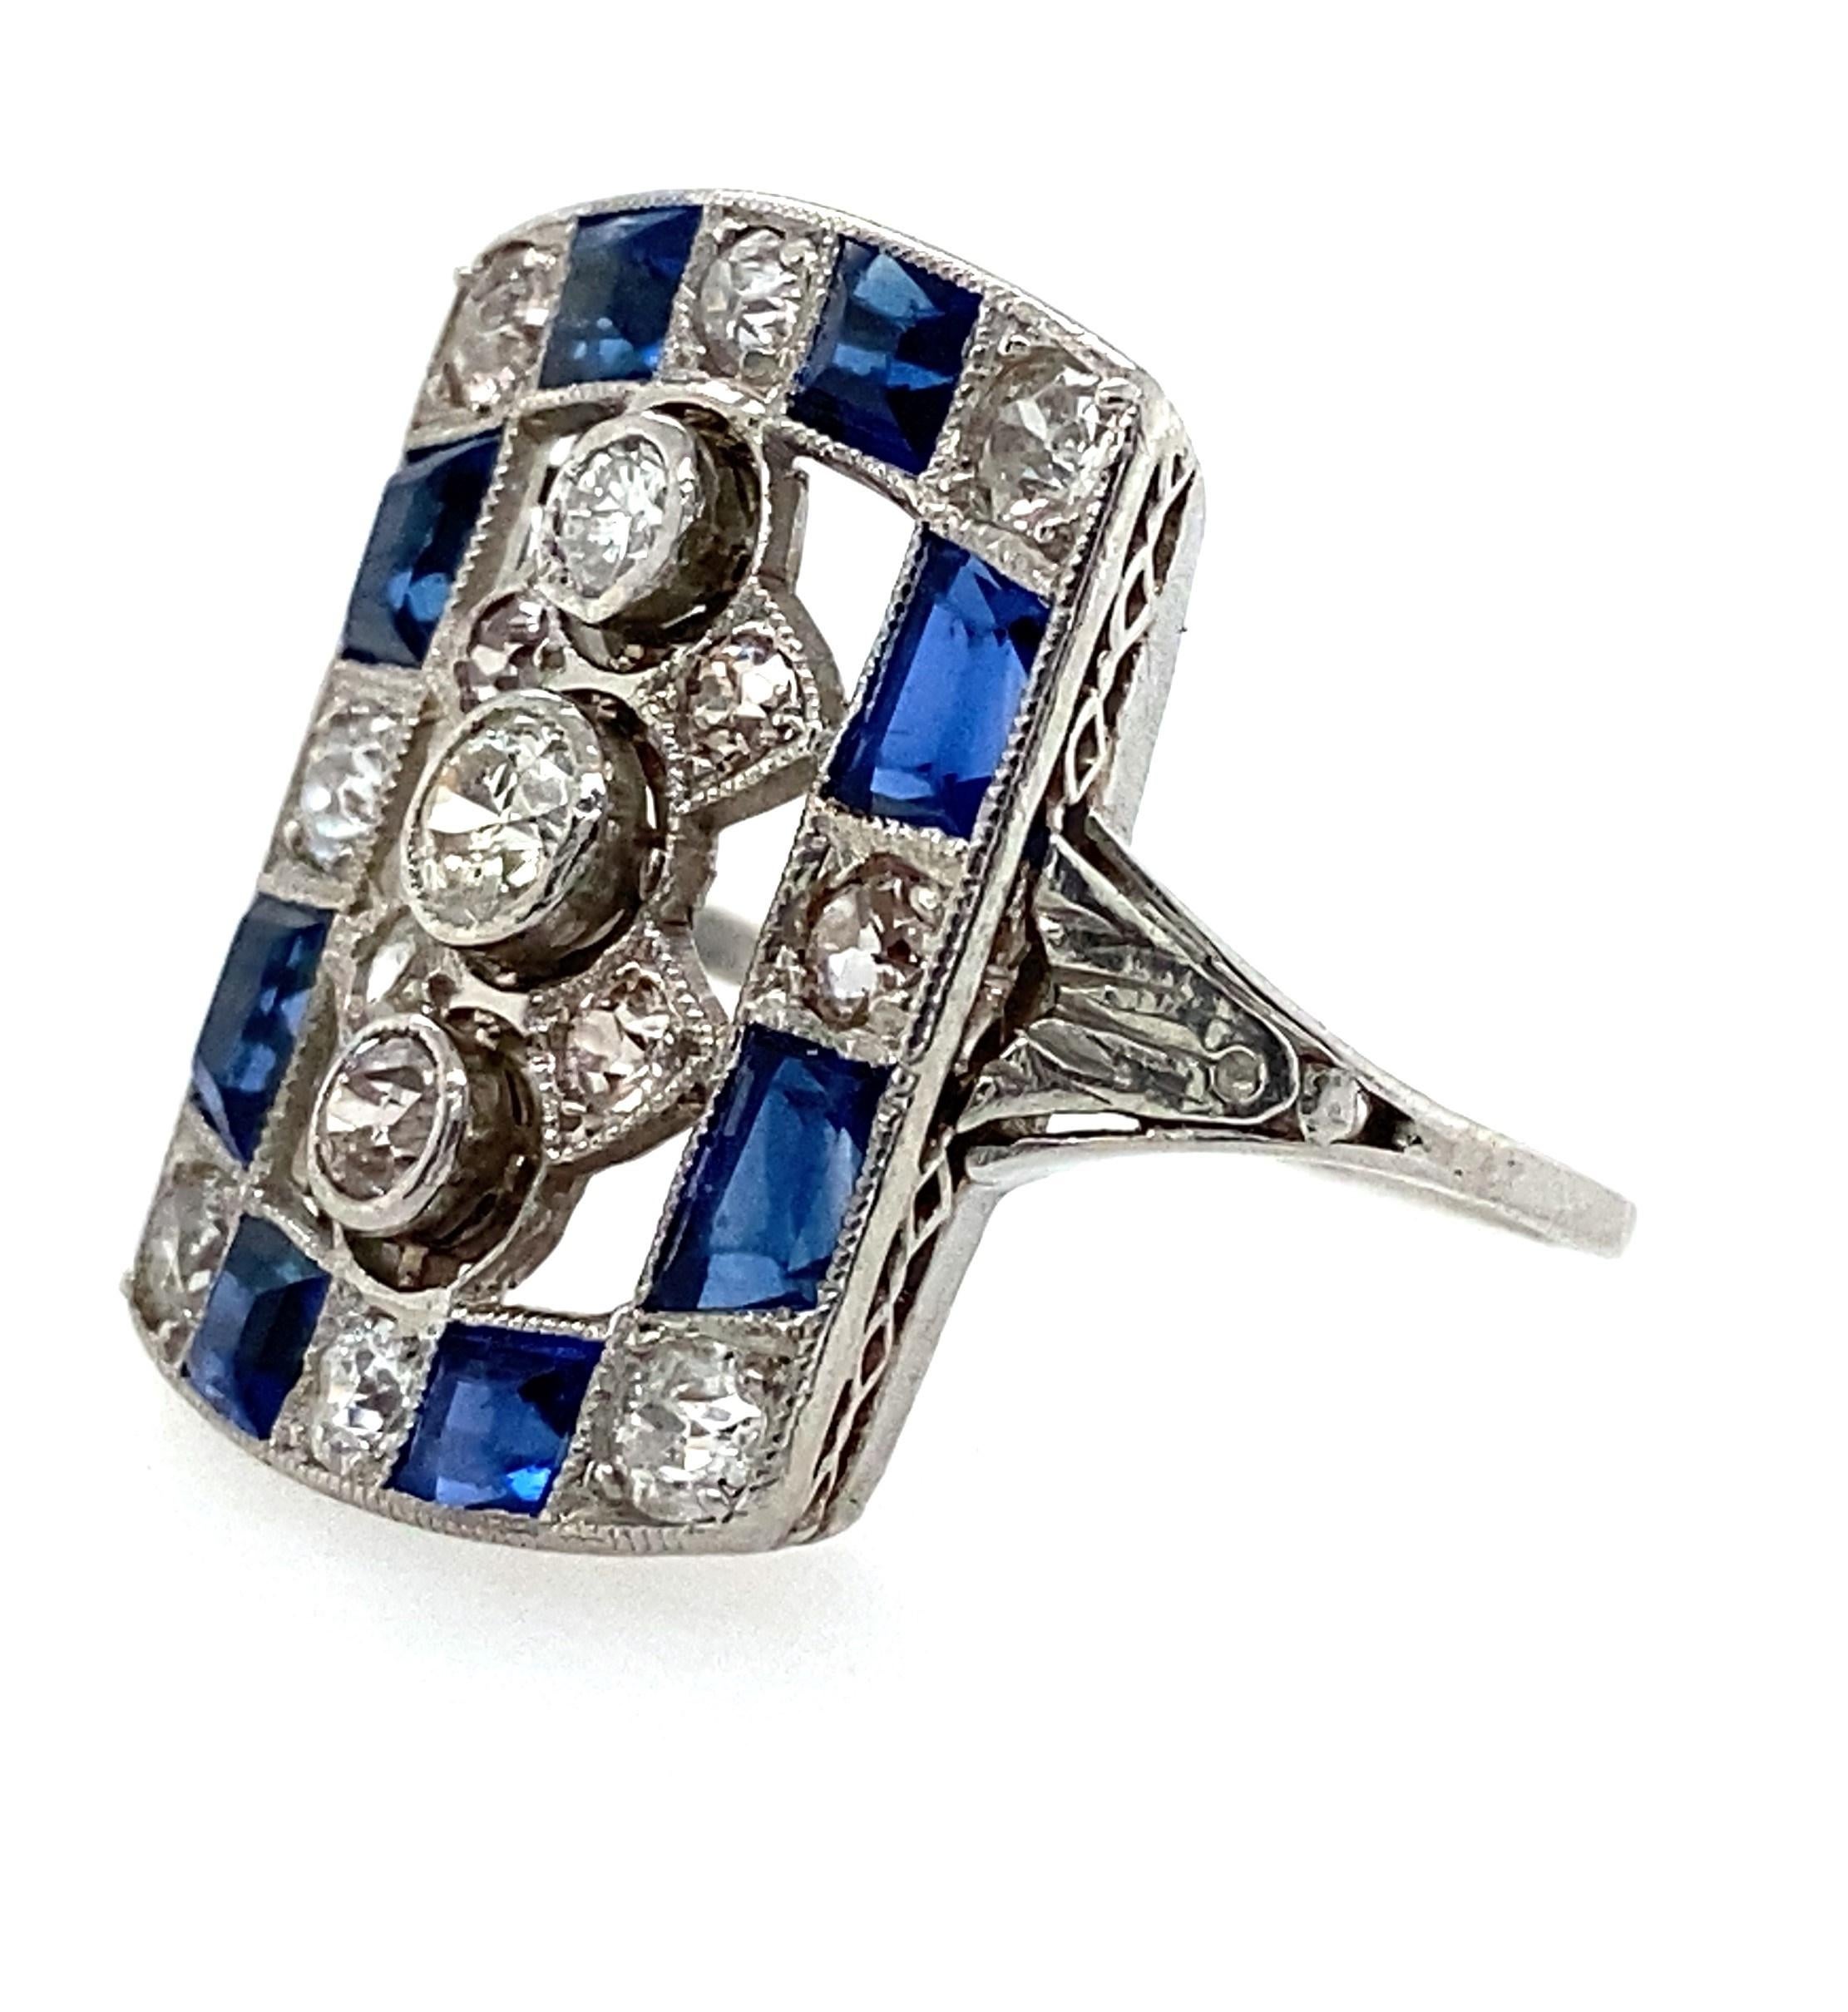 This platinum Art Deco ring is absolutely stunning. A checkerboard pattern of diamond and brilliant blue lab-grown sapphires surround a row of three bezel set old European cut diamonds and four smaller diamonds set in between them. The engraved